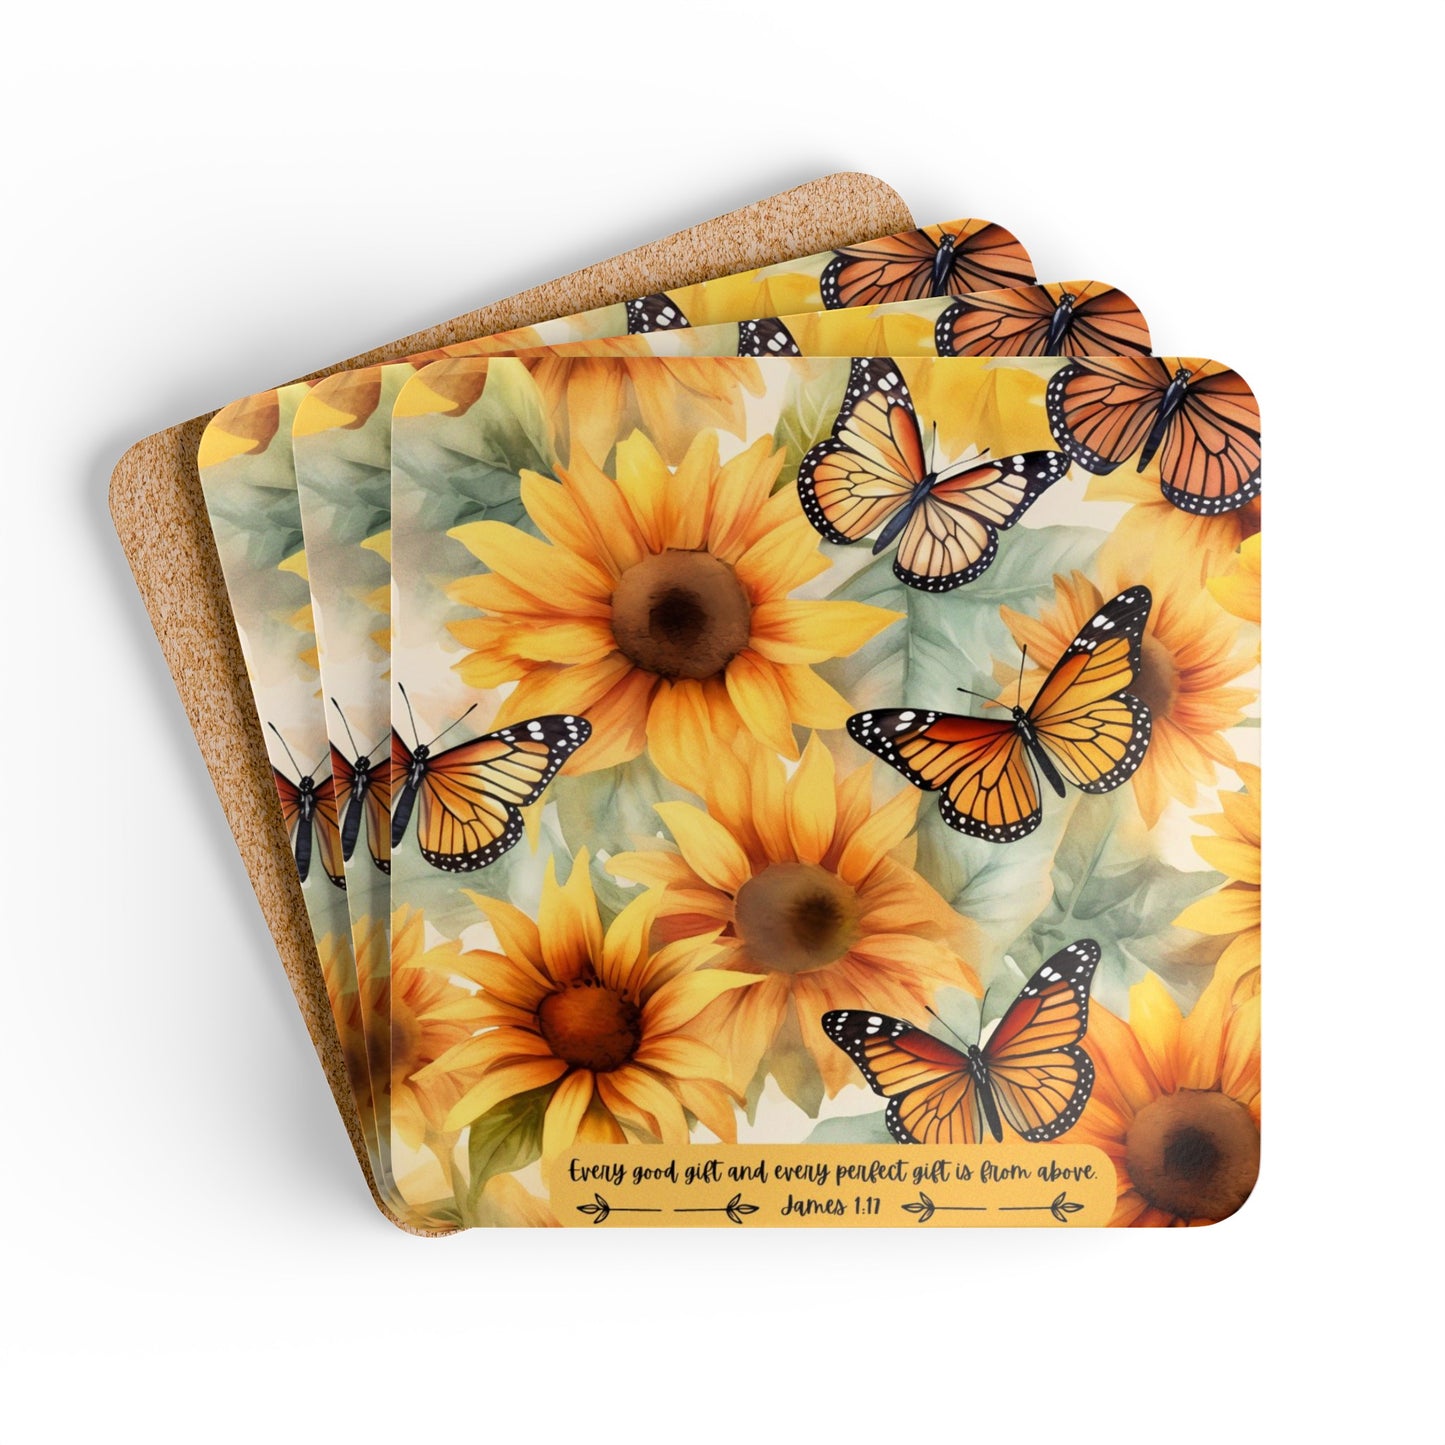 Sunflower and Butterfly Corkwood Coasters with Bible Verse - Set of 4